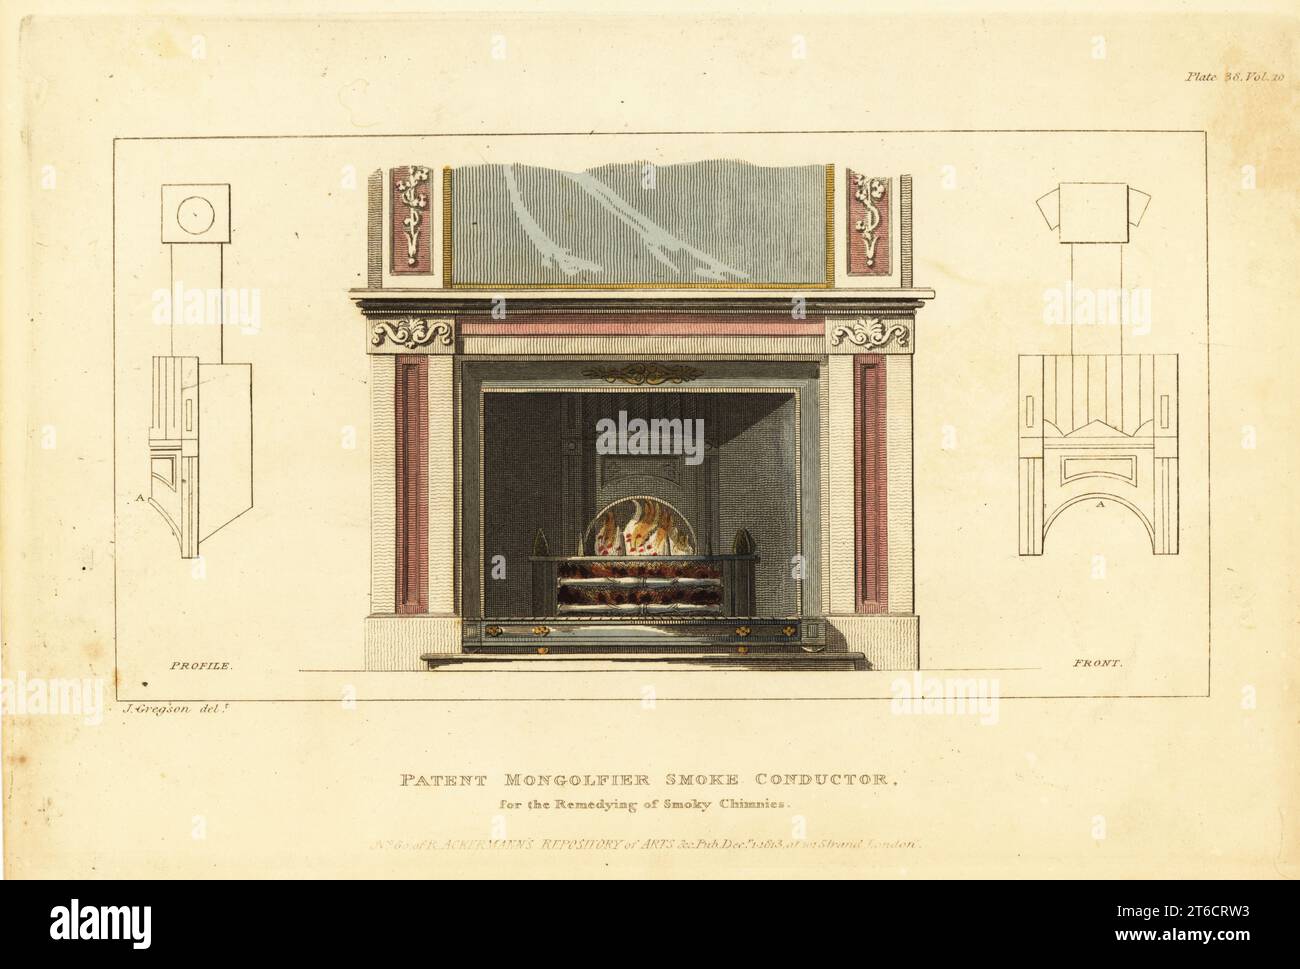 Patent Mongolfier smoke conductor fireplace for the remedying of smoky chimnies. Based on the Mongolfier Principle, this smoke conductor was made by Joseph Gregson of Charles Street, Grosvenor Square. Handcoloured copperplate engraving from The Upholsterer's and Cabinet-Maker's Repository consisting of seventy-six designs of modern and fashionable furniture, Rudolph Ackermann, London, 1830. Stock Photo